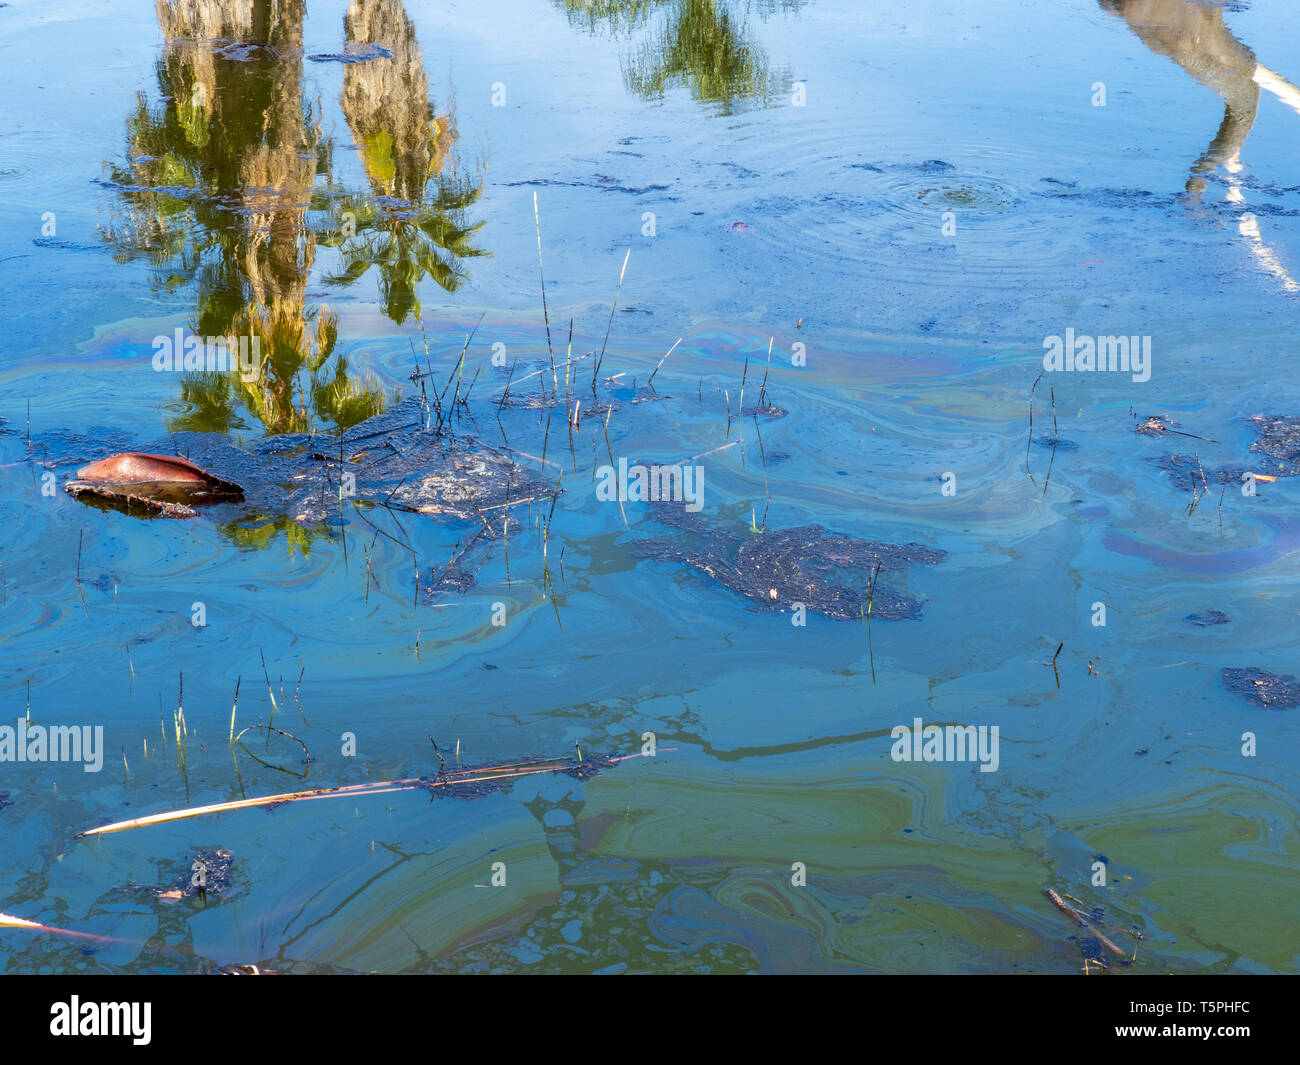 Tropical water with reflection of palm trees polluted with oil and debris Stock Photo